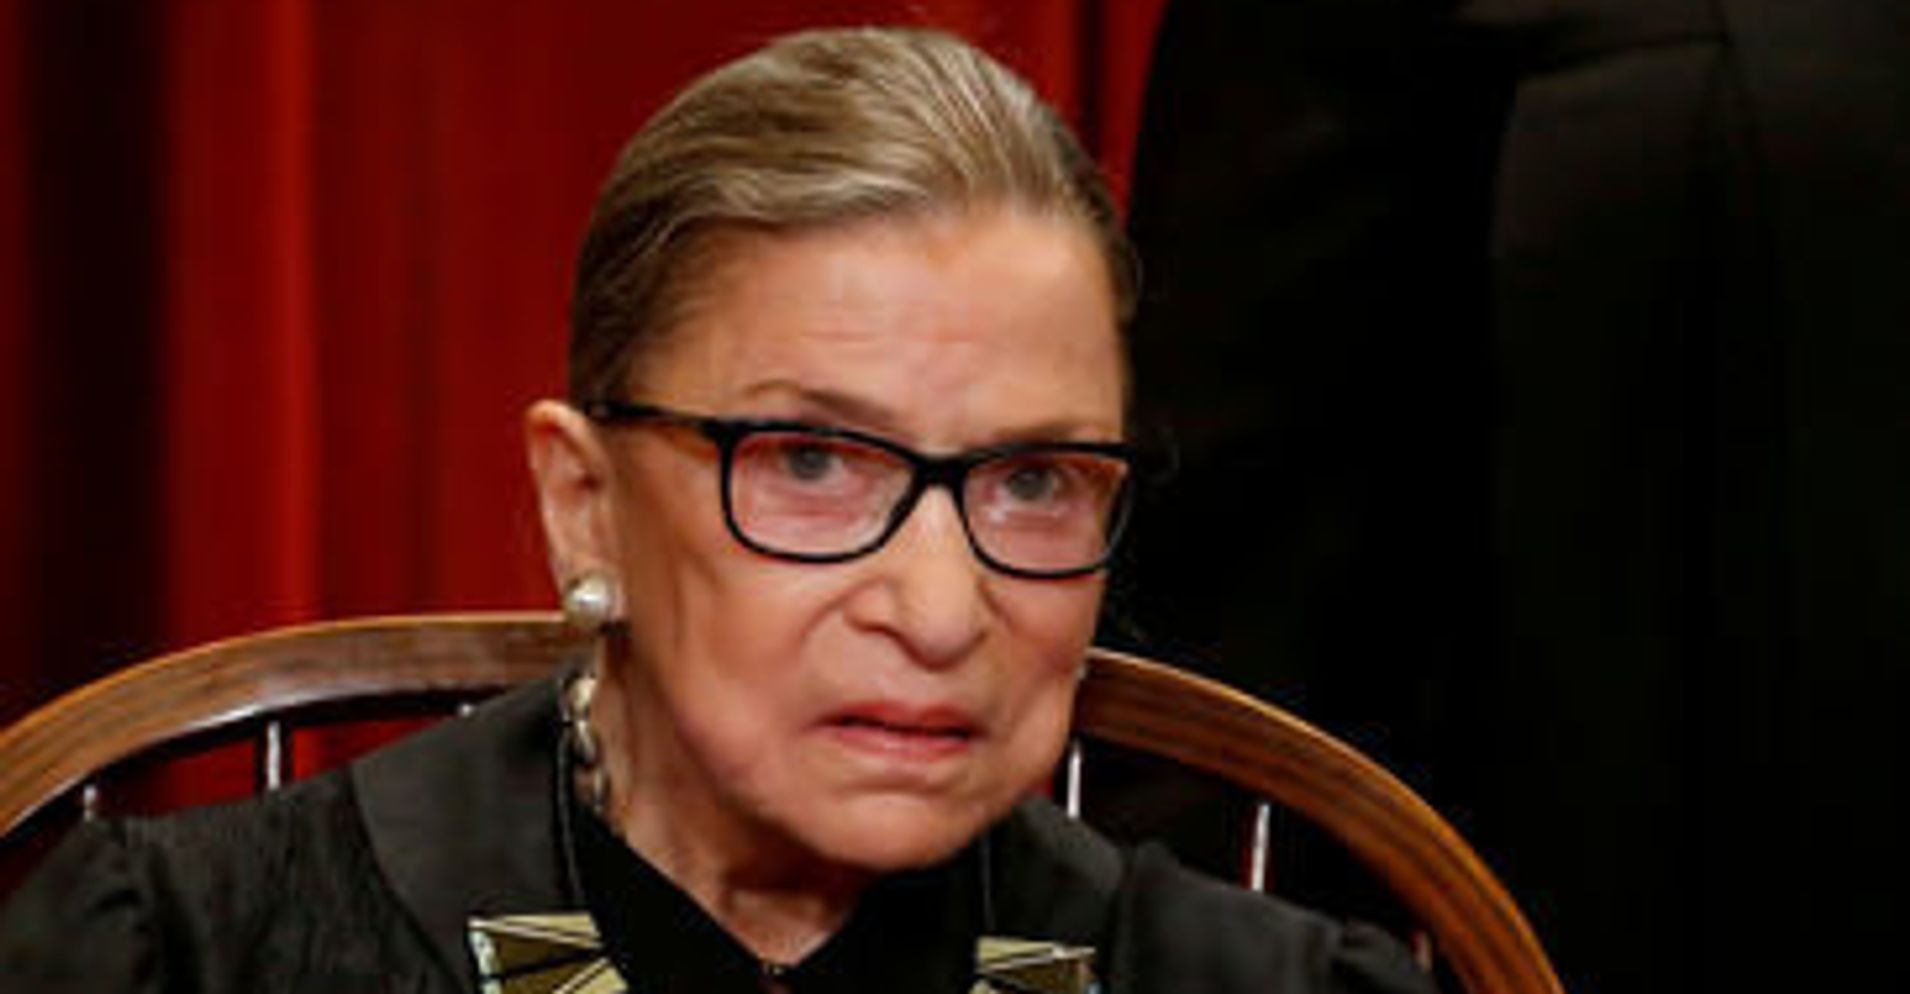 Justice Ruth Bader Ginsburg Is 'Cracking Jokes' After Breaking Ribs, Nephew Says